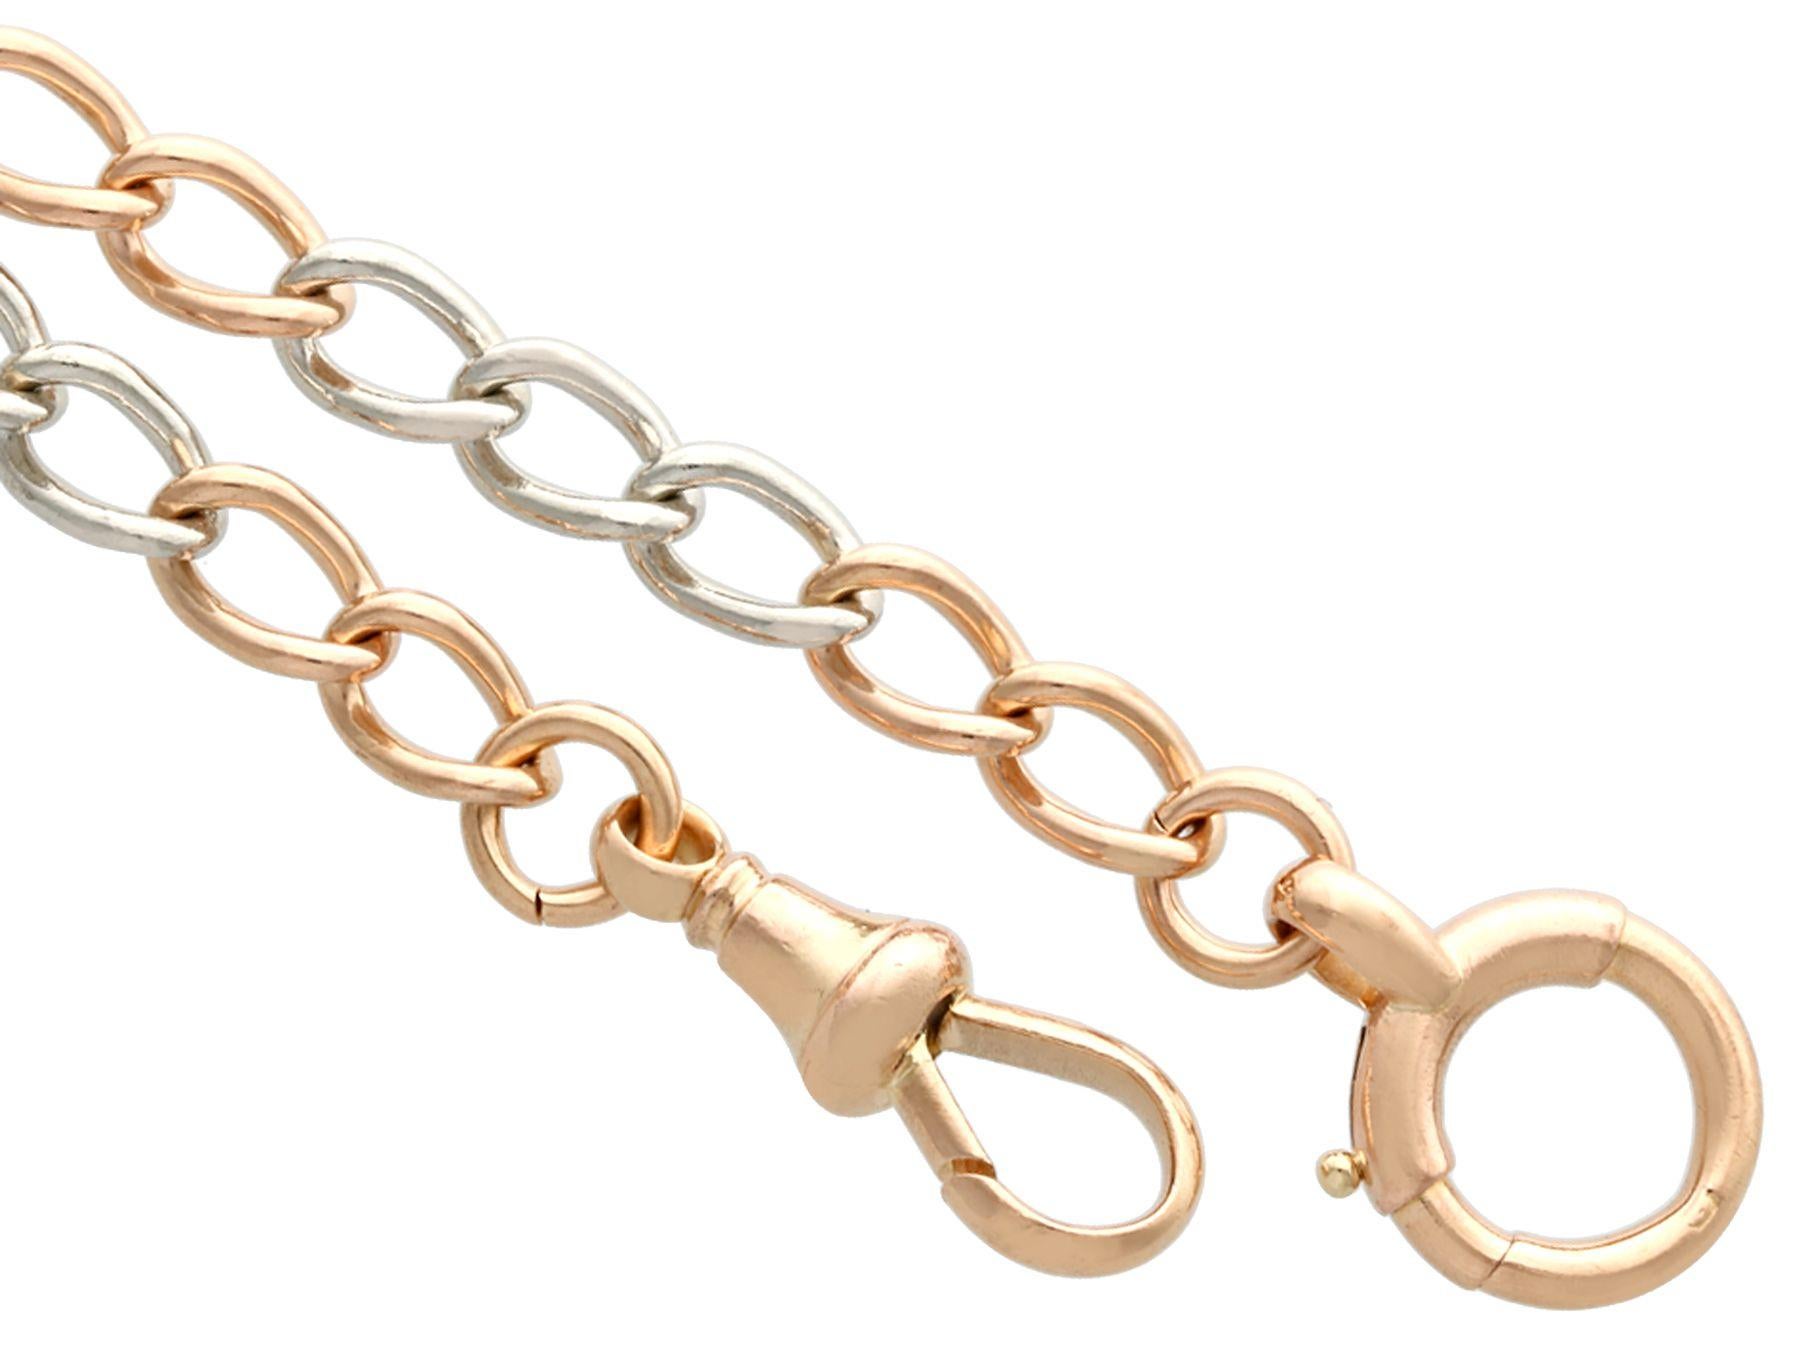 A fine and impressive antique 18 karat yellow gold and platinum double Albert watch chain; part of our diverse antique jewellery and estate jewelry collections.

This fine and impressive antique chain has been crafted in 18k yellow and